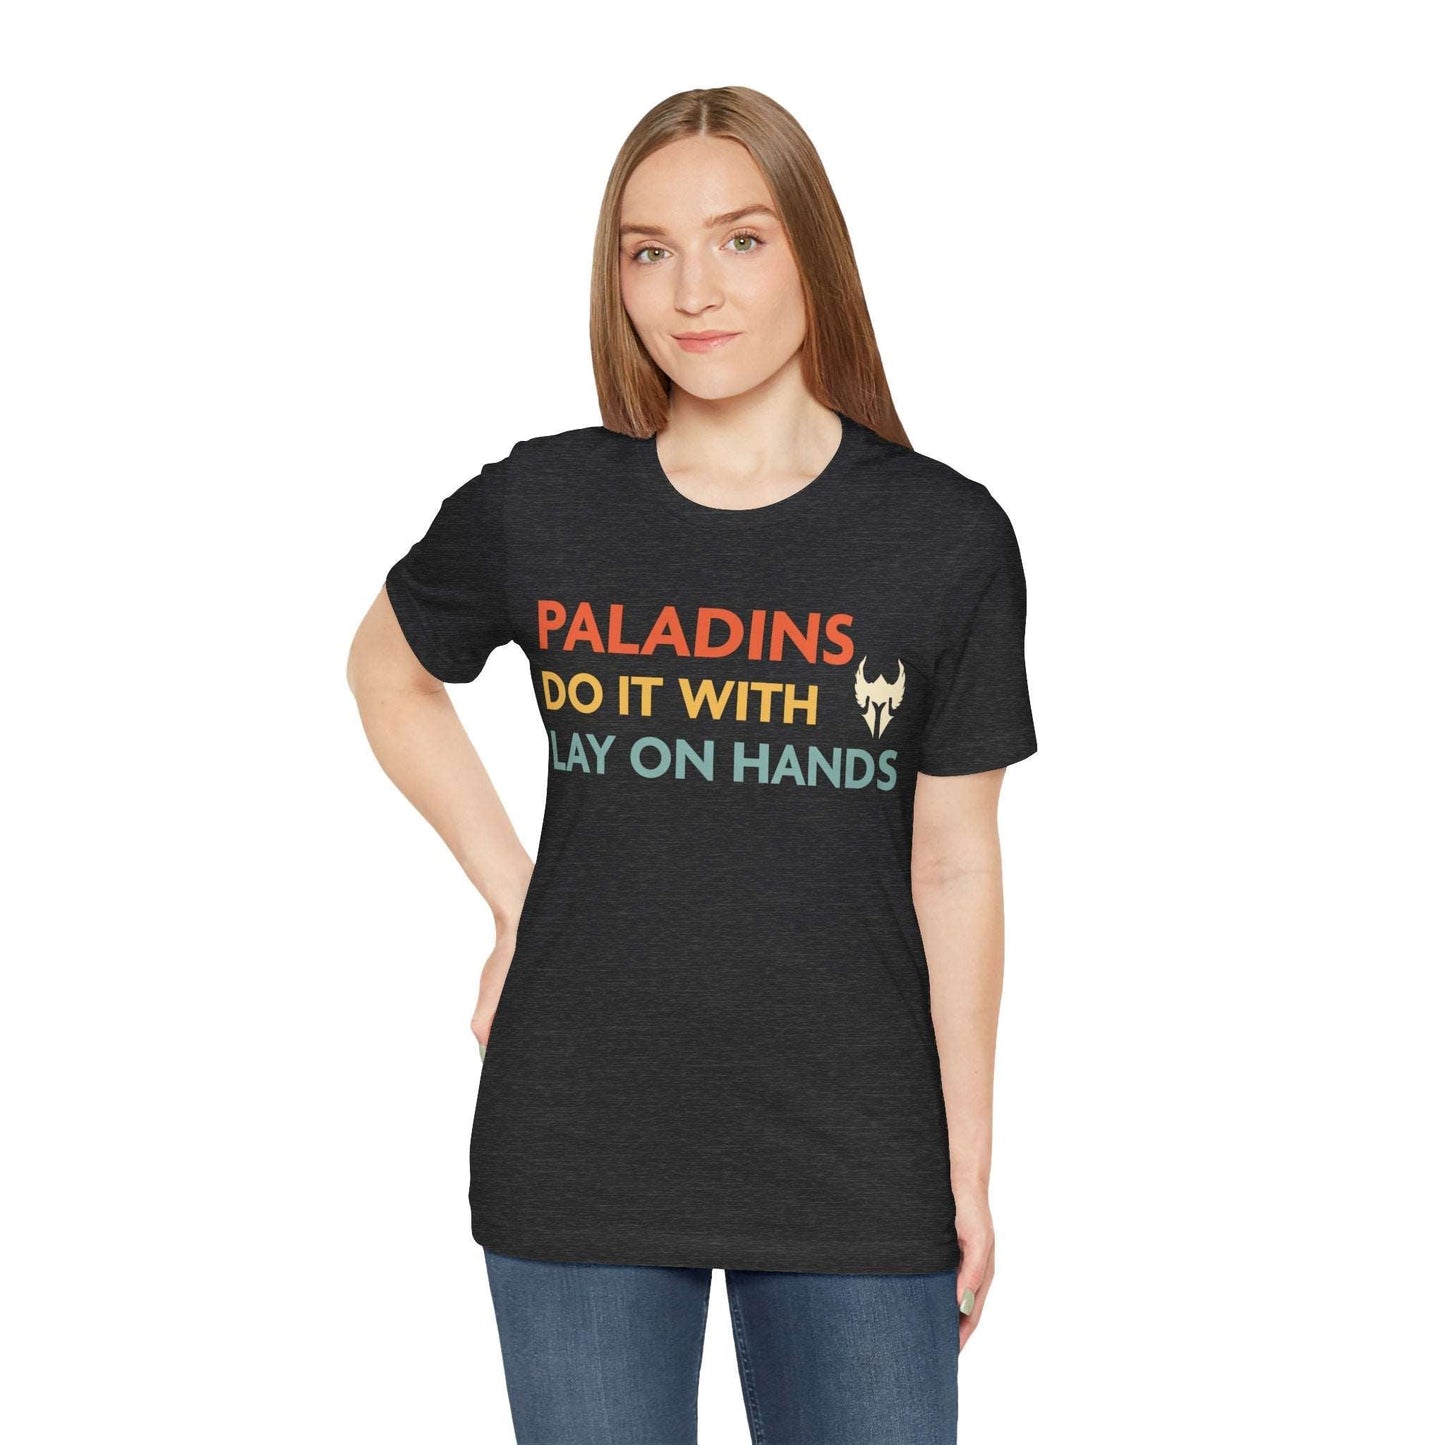 DnD Paladins Do It With Lay On Hands Shirt T-Shirt